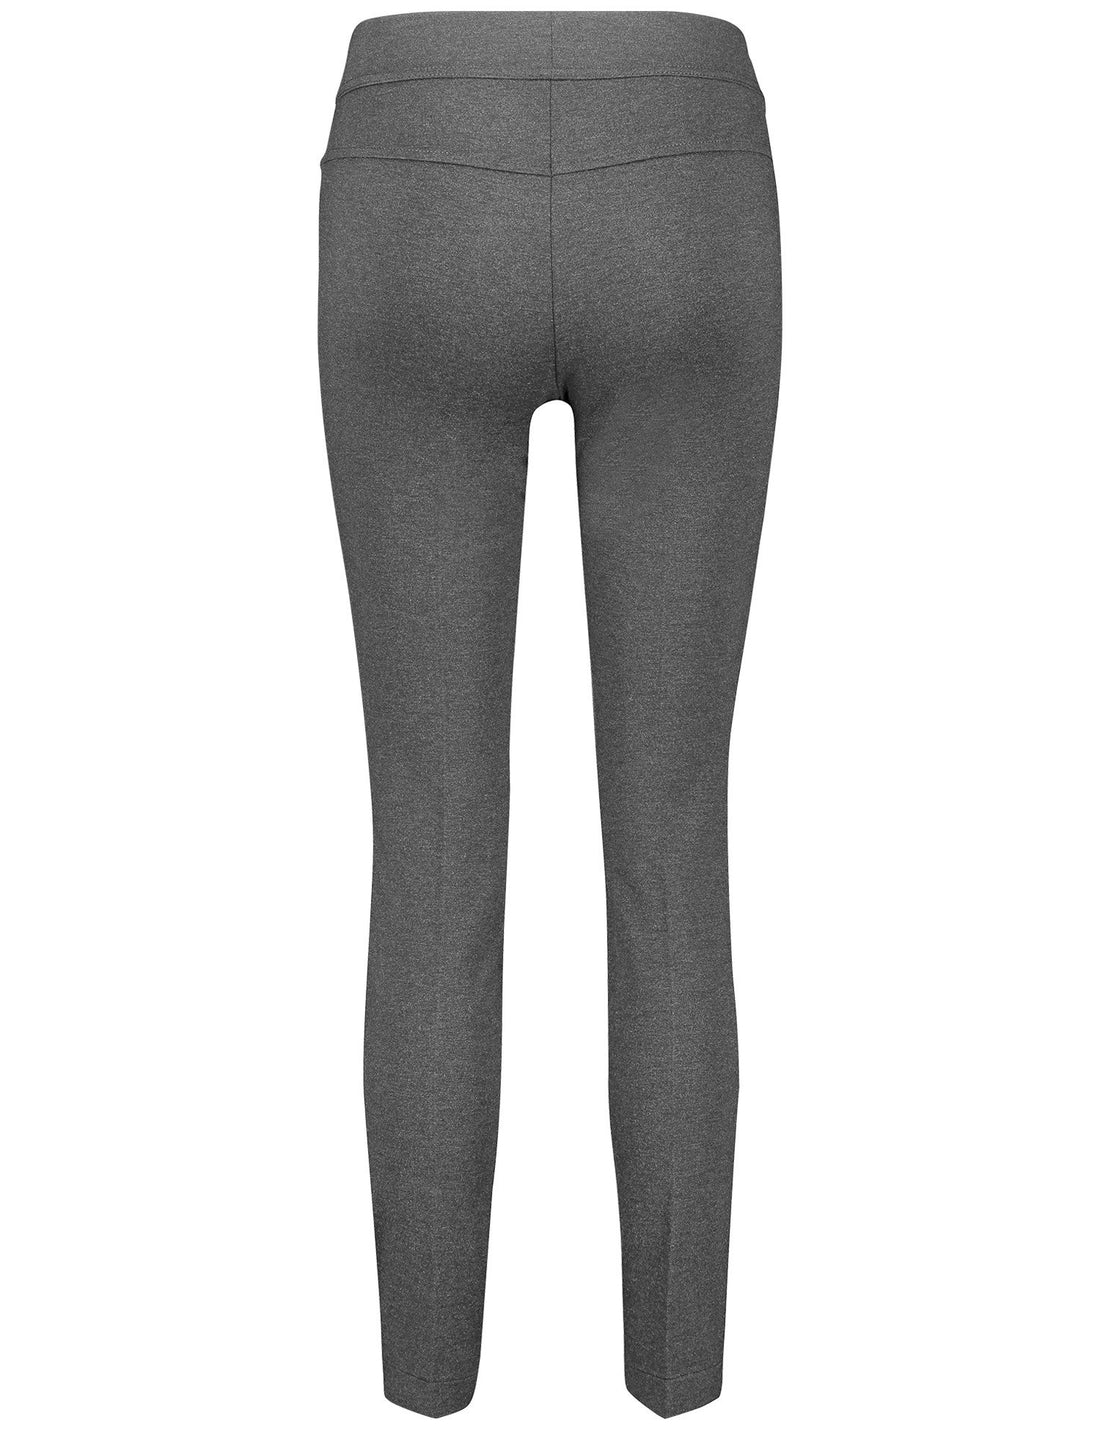 Grey Leggings With Side Zippers_122028-66275_202690_02